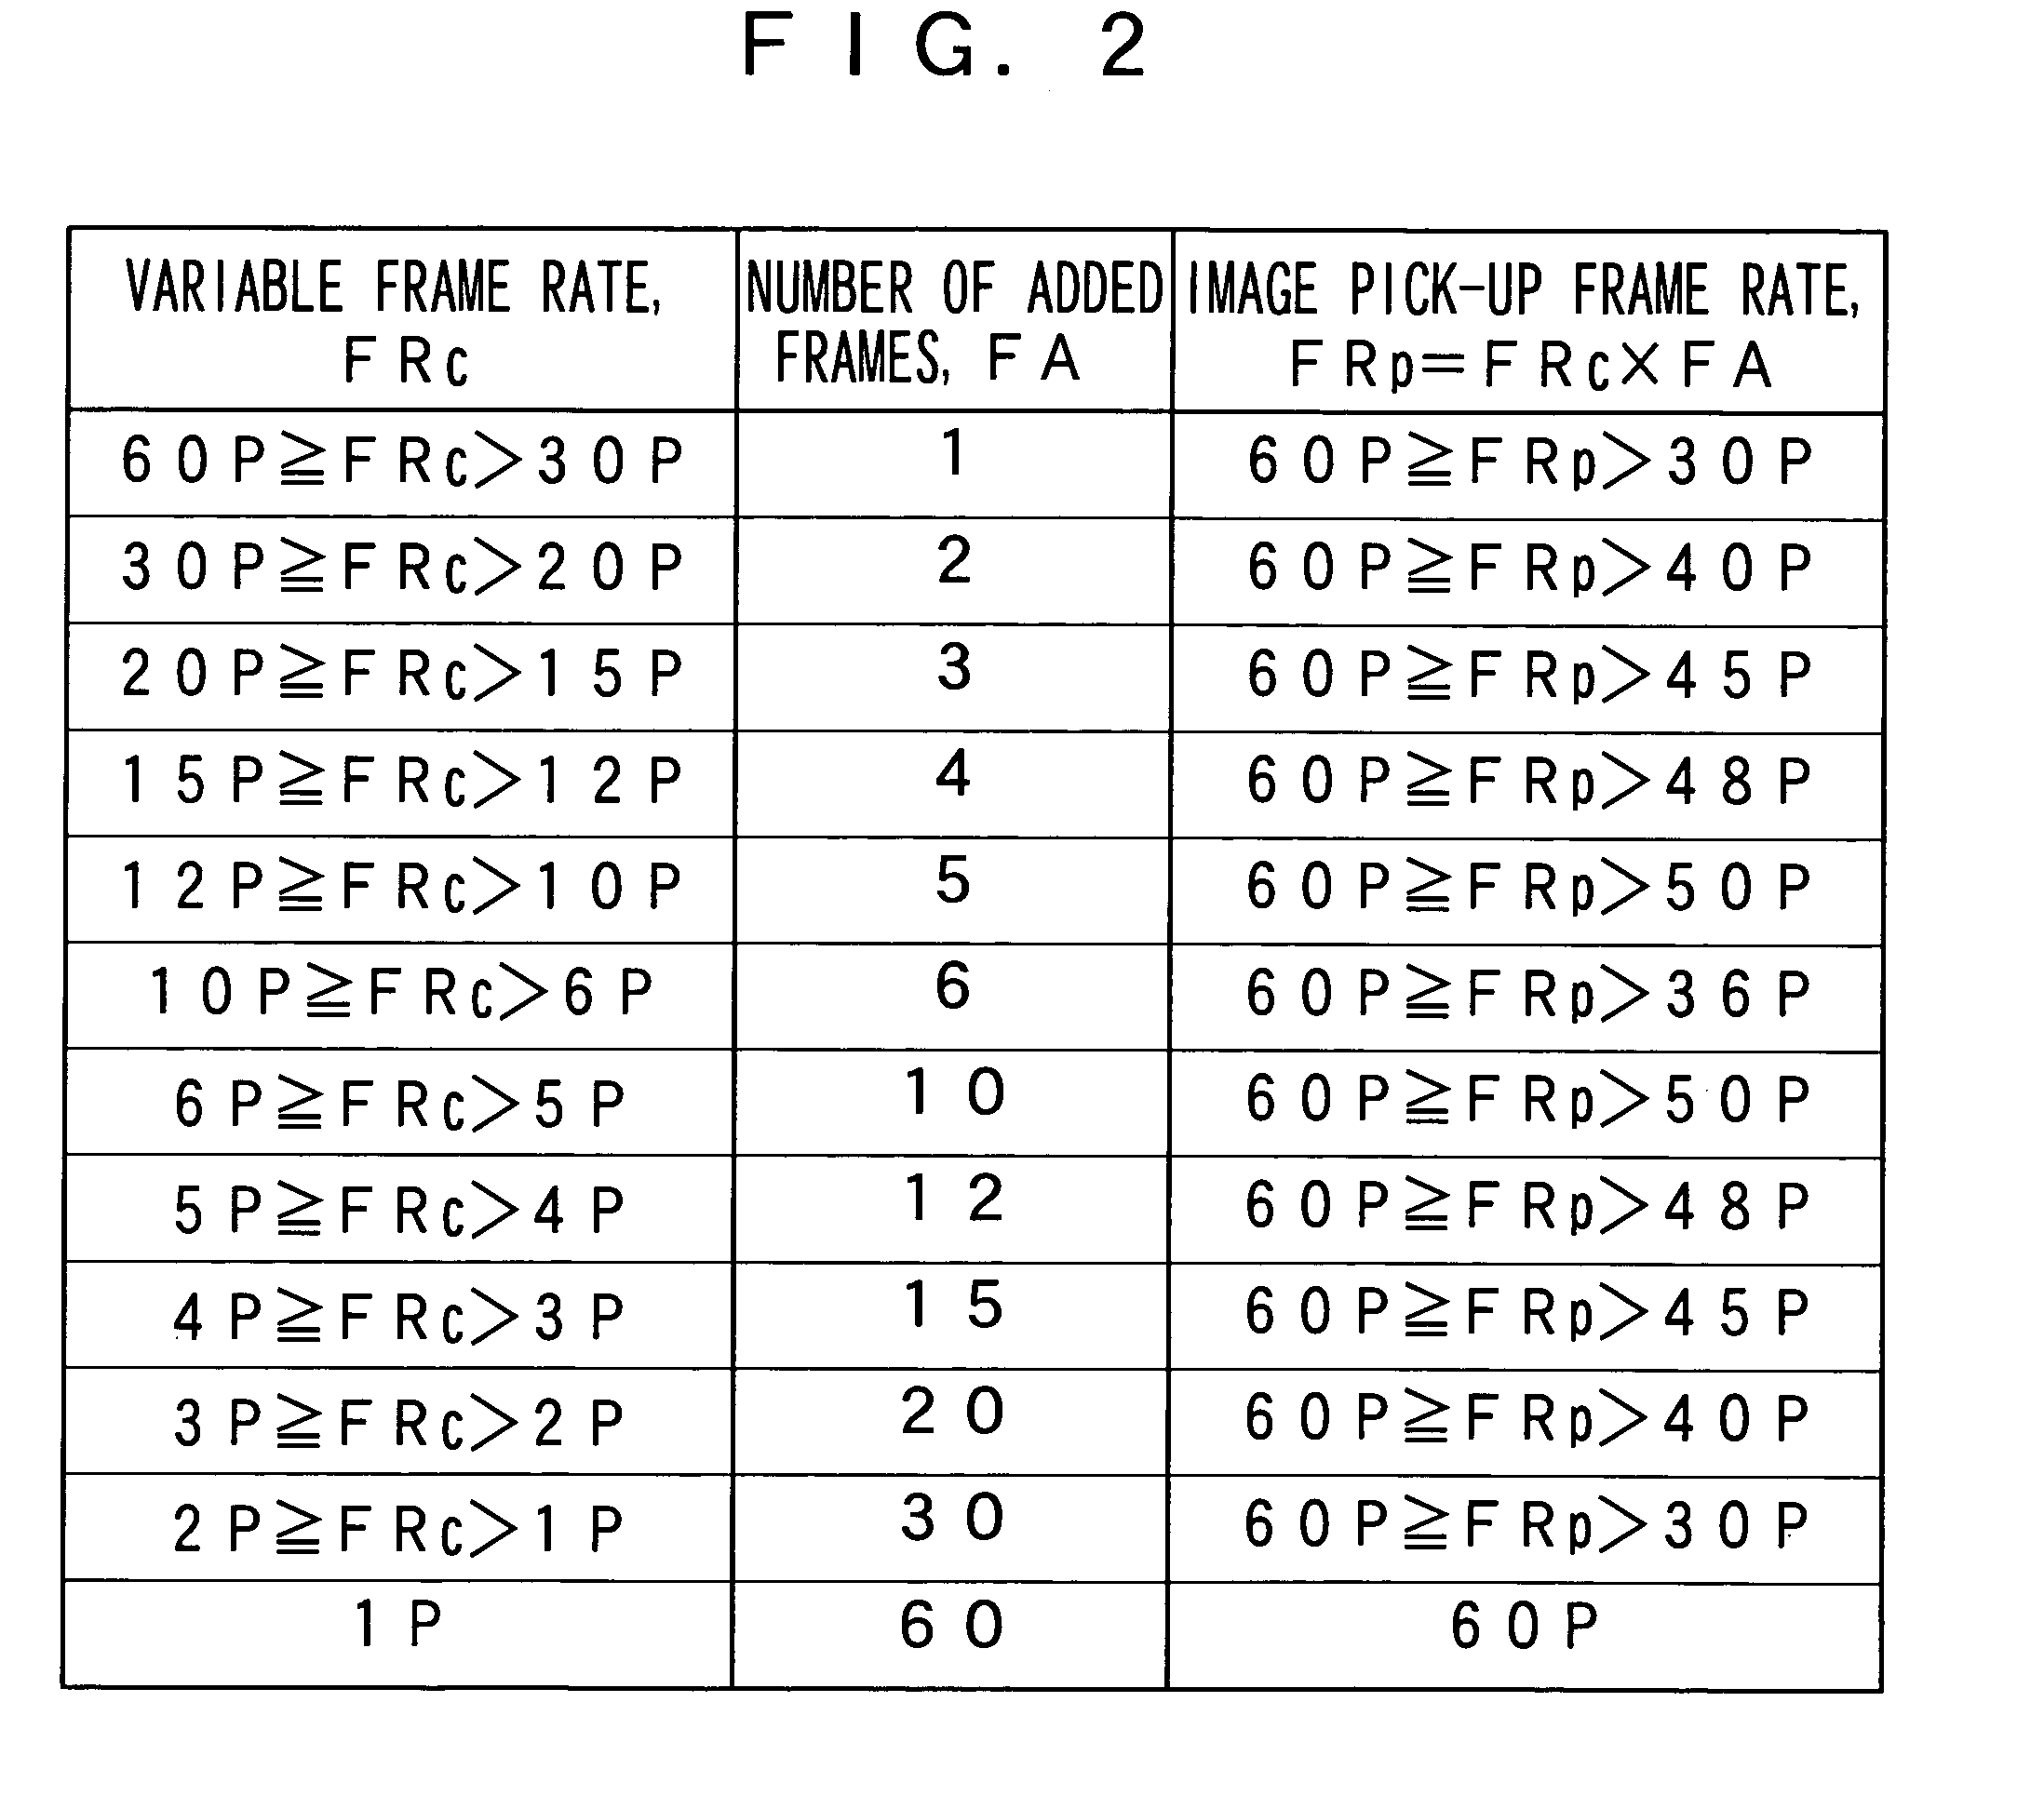 Image pick-up device using an image signal of a variable frame-rate